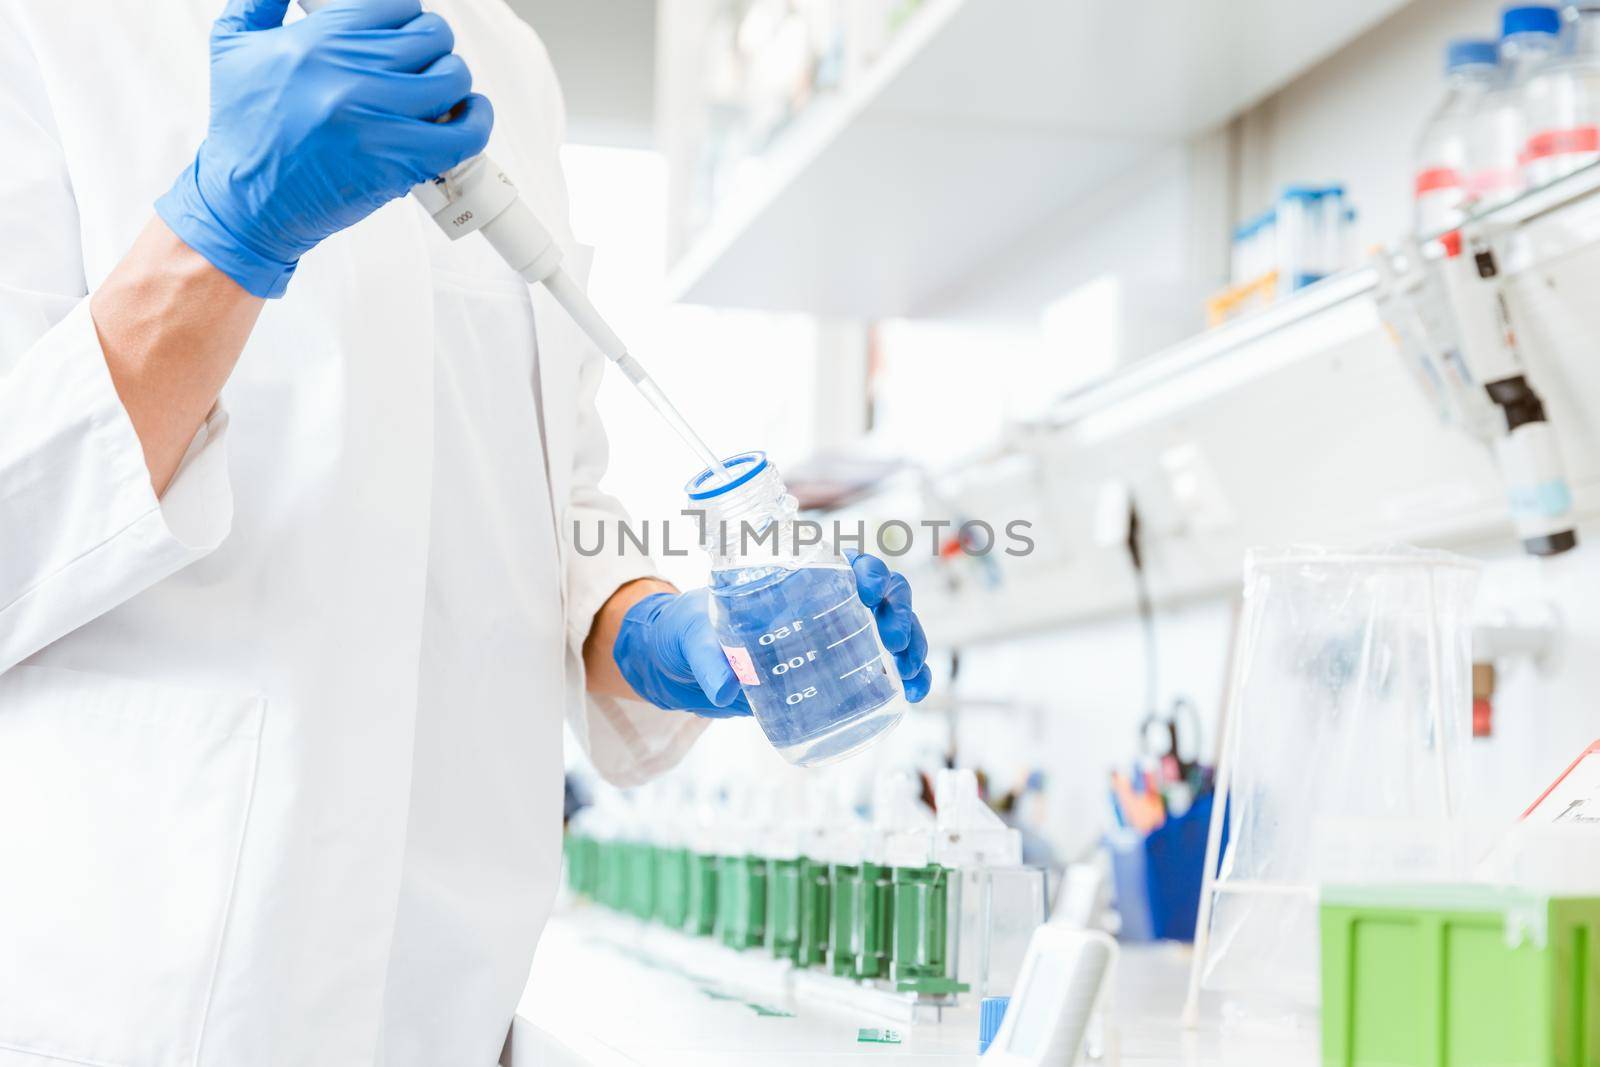 Closeup of a doctors hand wearing blue gloves using a dropper to suspense sample from bottle